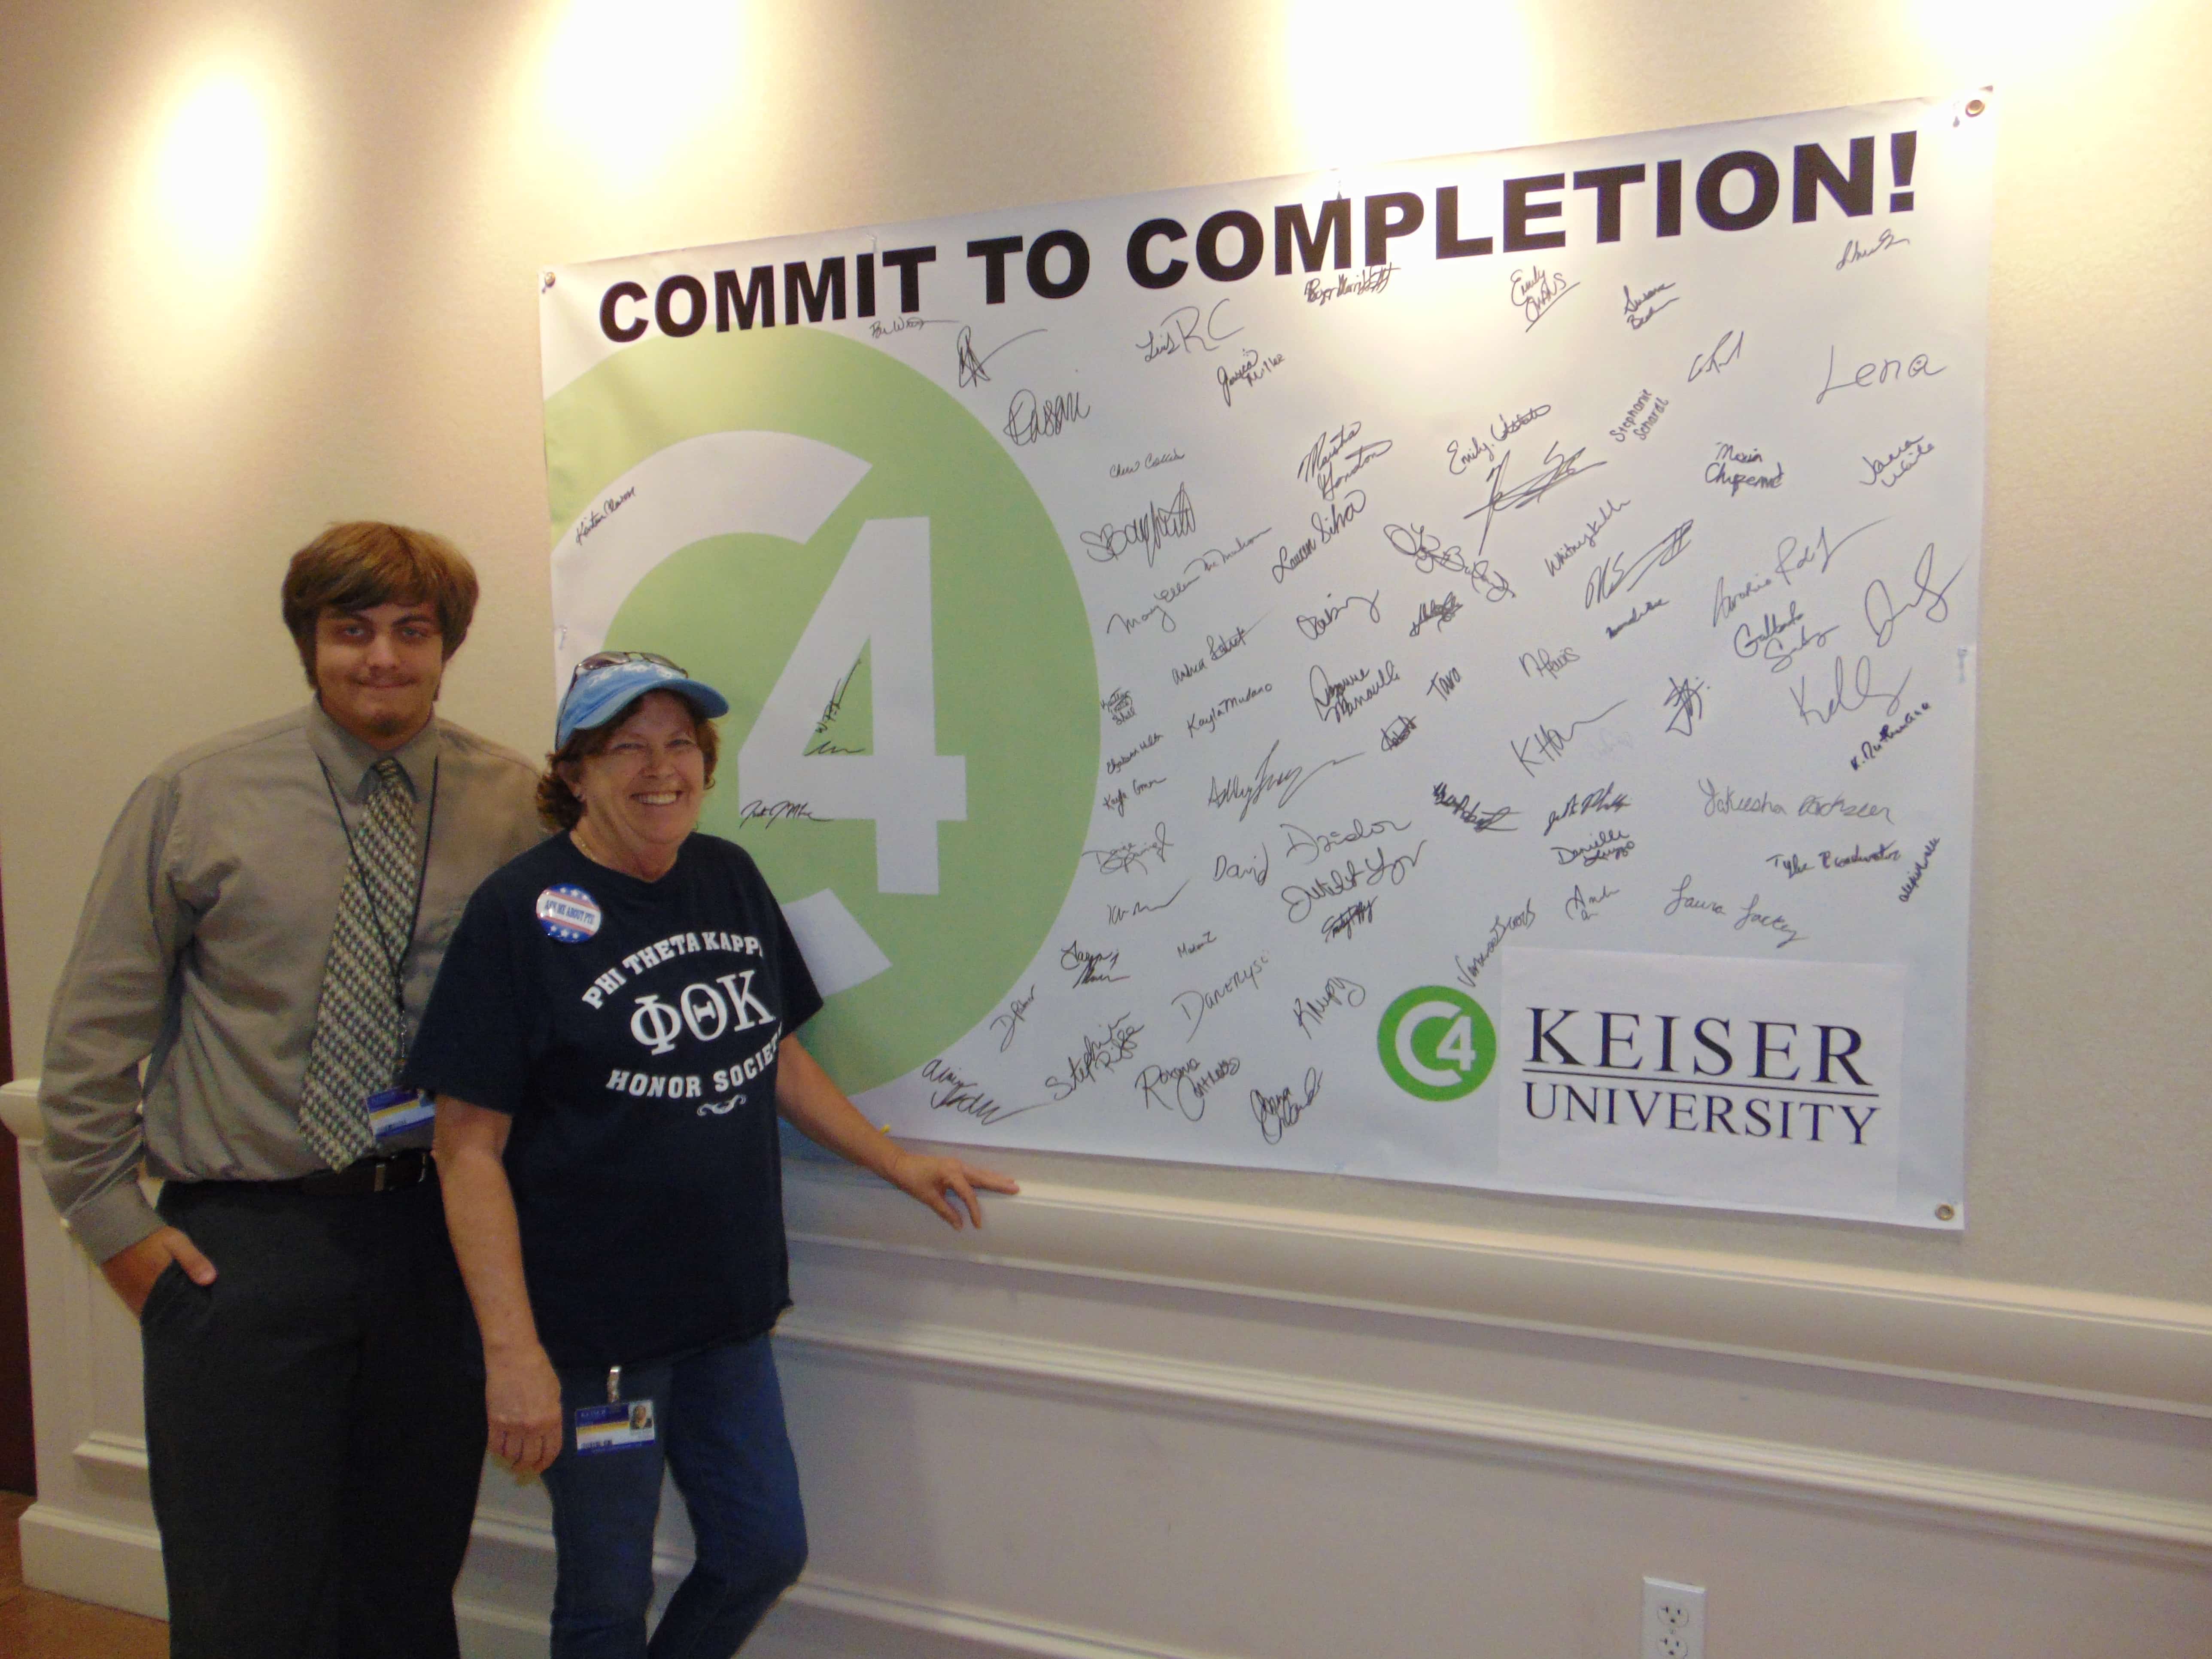 Sarasota Students Commit to Complete